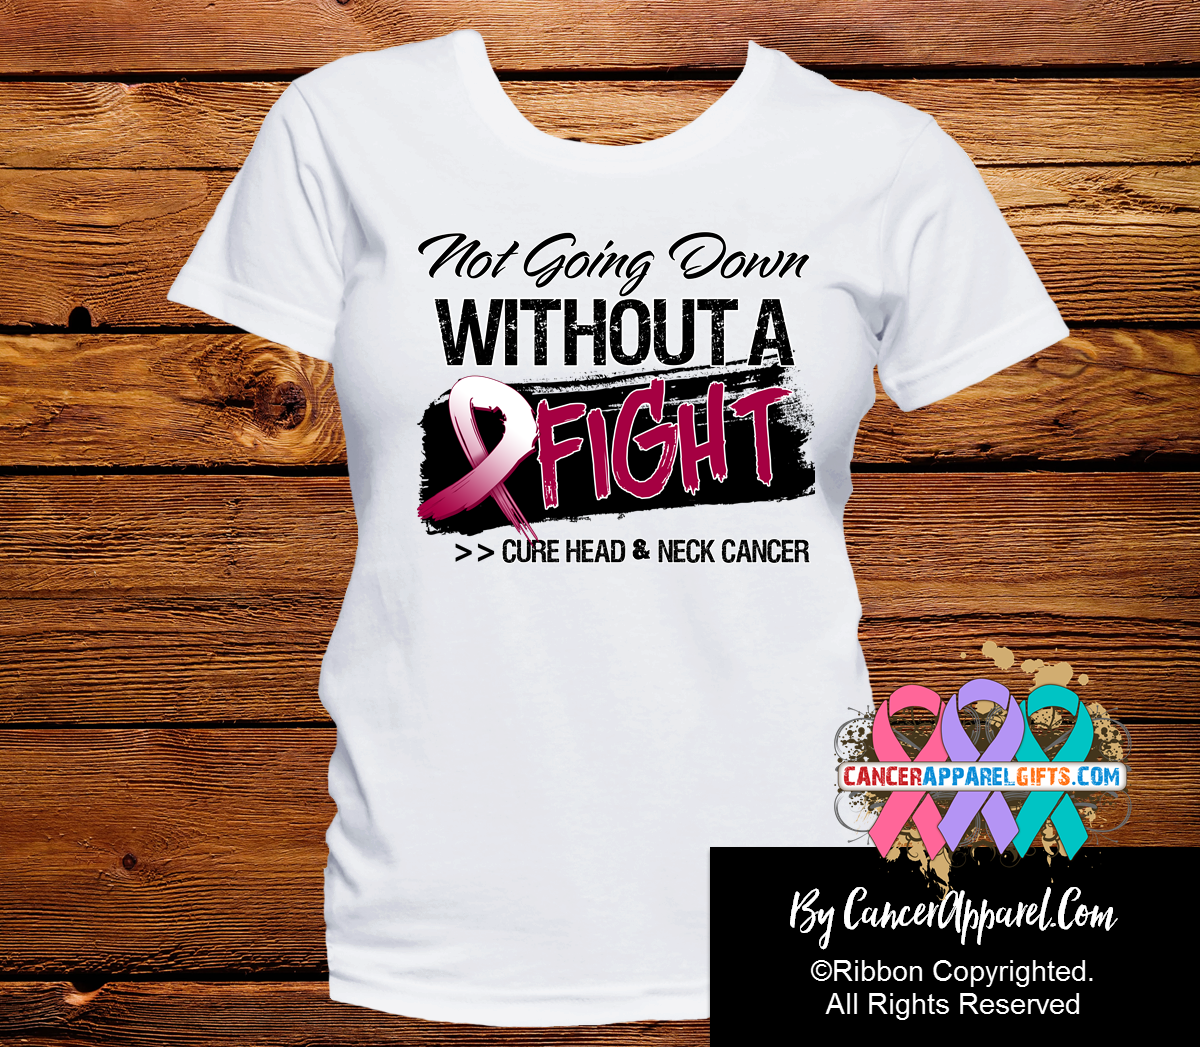 Head and Neck Cancer Not Going Down Without a Fight Shirts - Cancer Apparel and Gifts